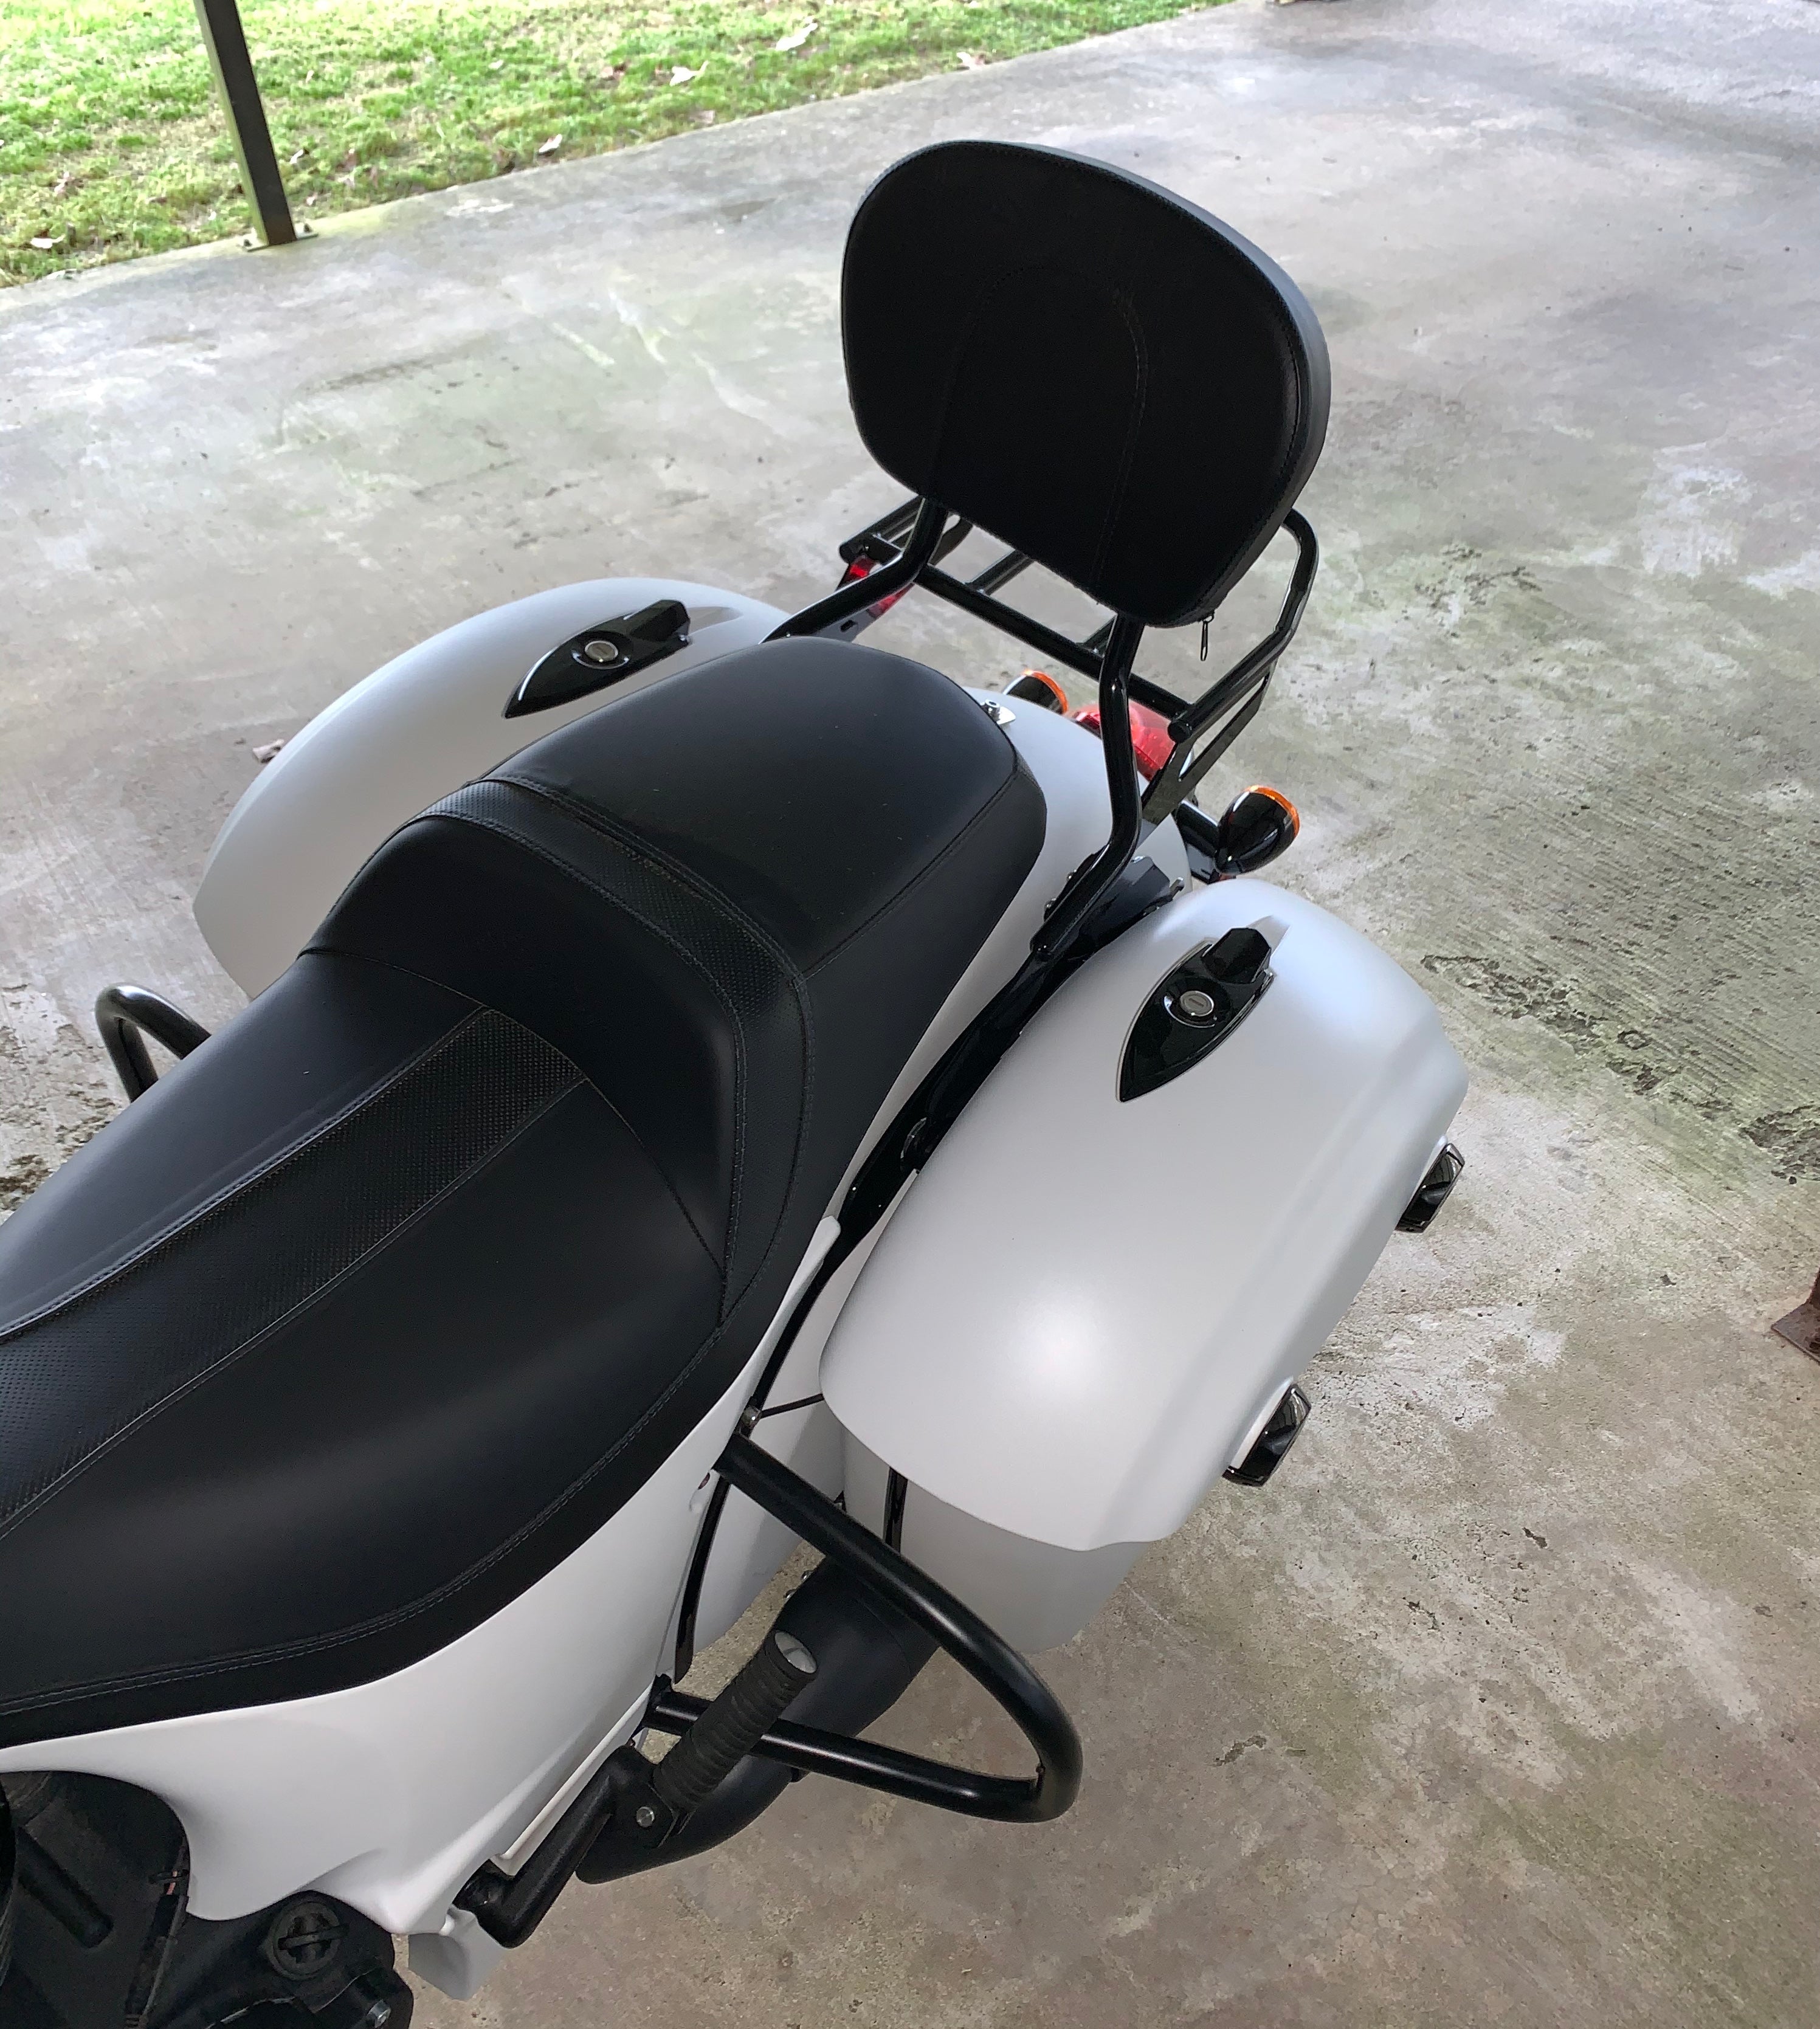 Short gloss black Backrest with pad for Indian models